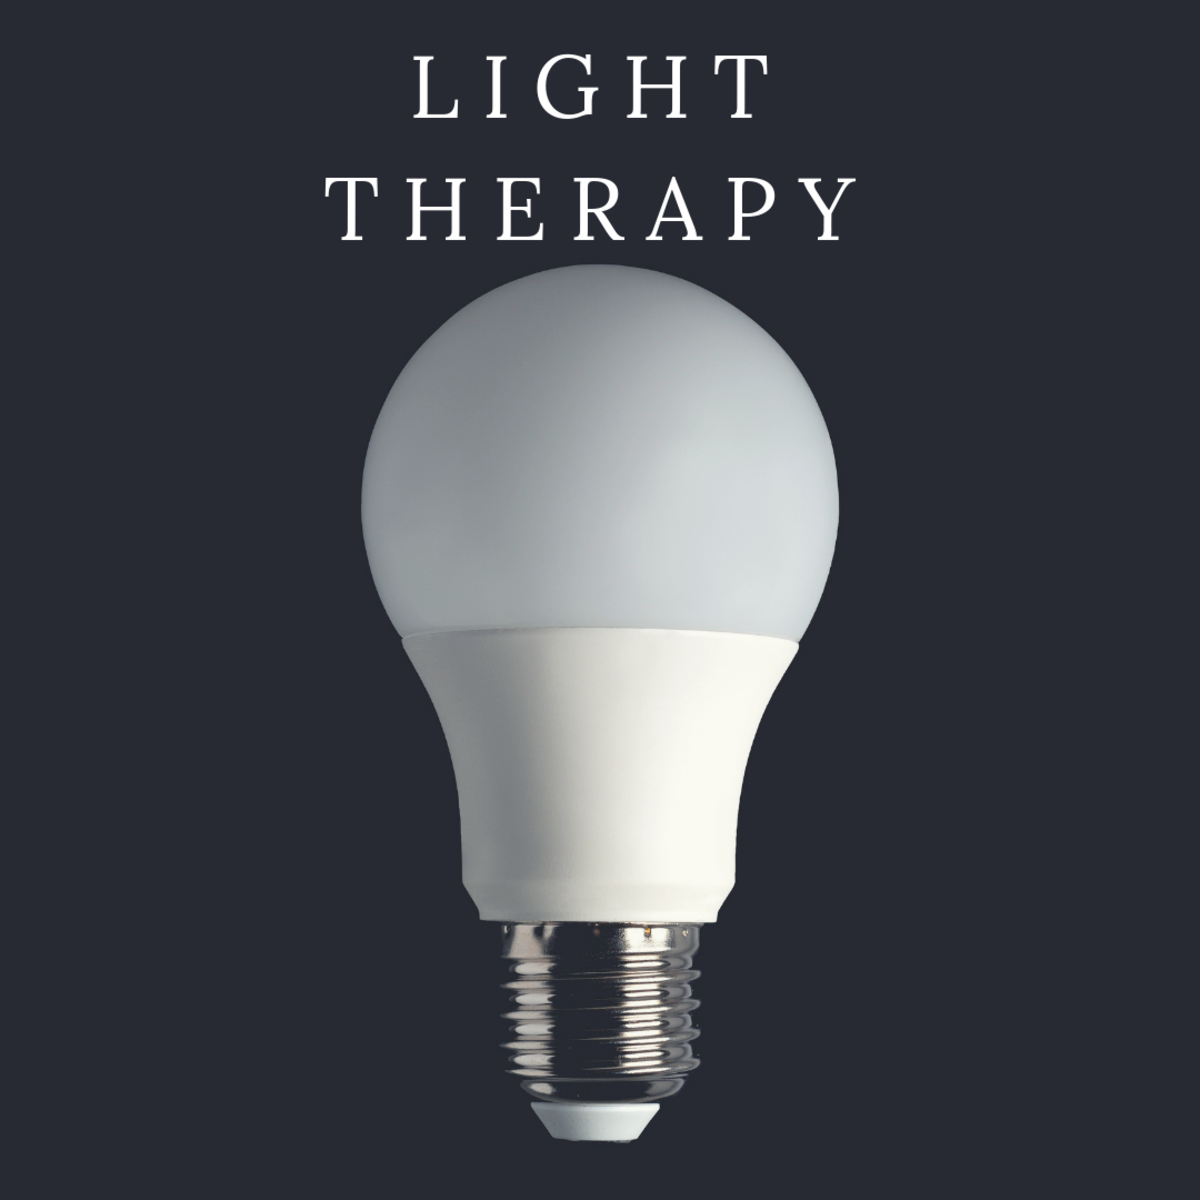 The Healing Benefits of Light Therapy